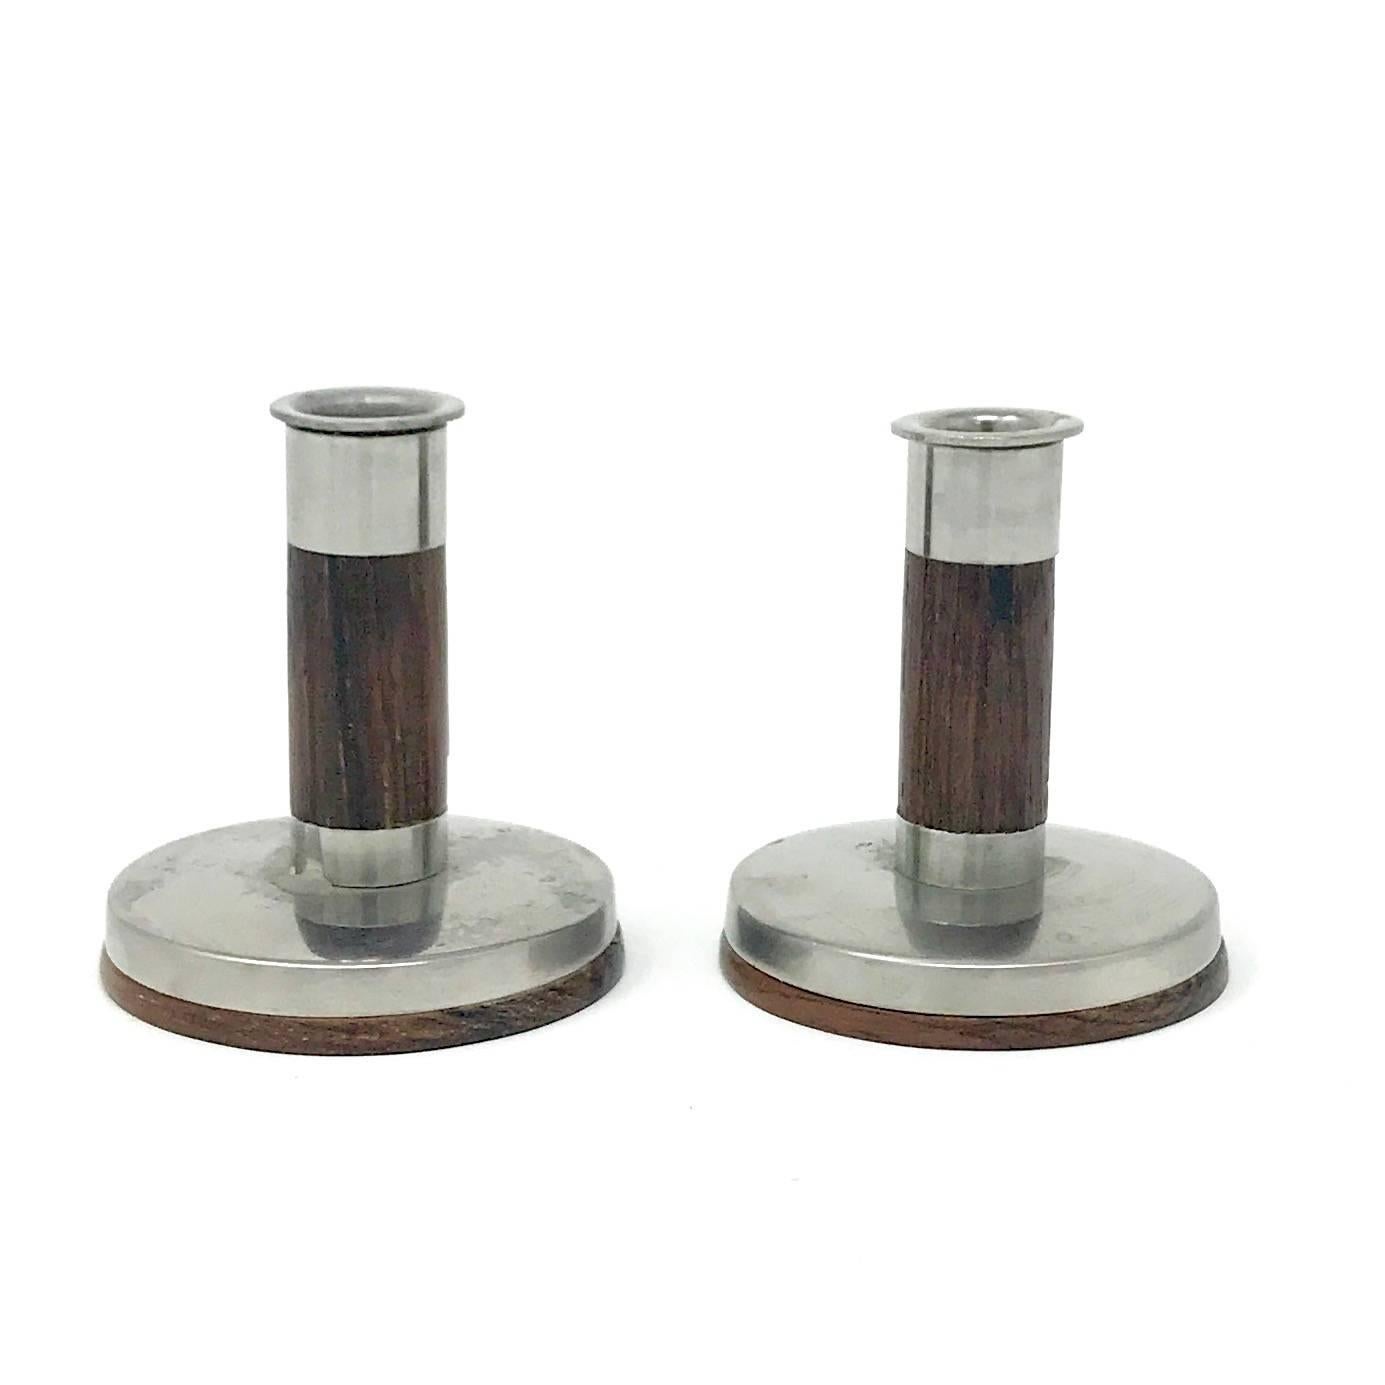 Scandinavian Modern Pair of Danish Modern Rosewood and Stainless Steel Candlesticks by Lundtofte For Sale